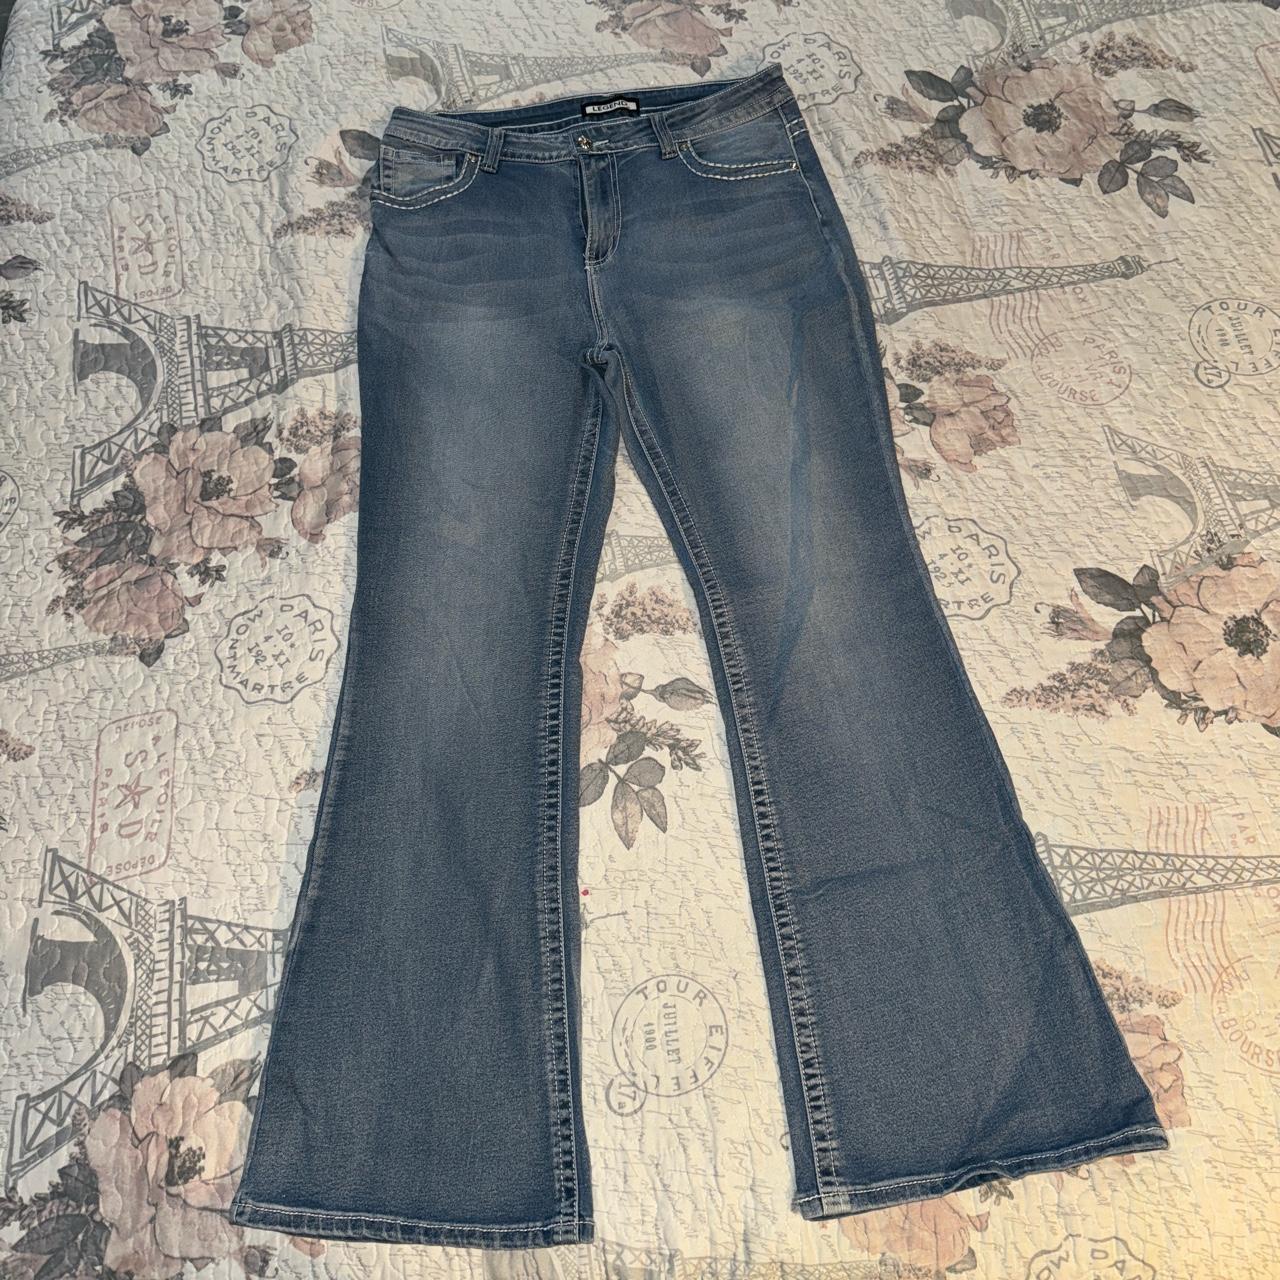 Flared jeans Legend bedazzled jeans Only worn about... - Depop